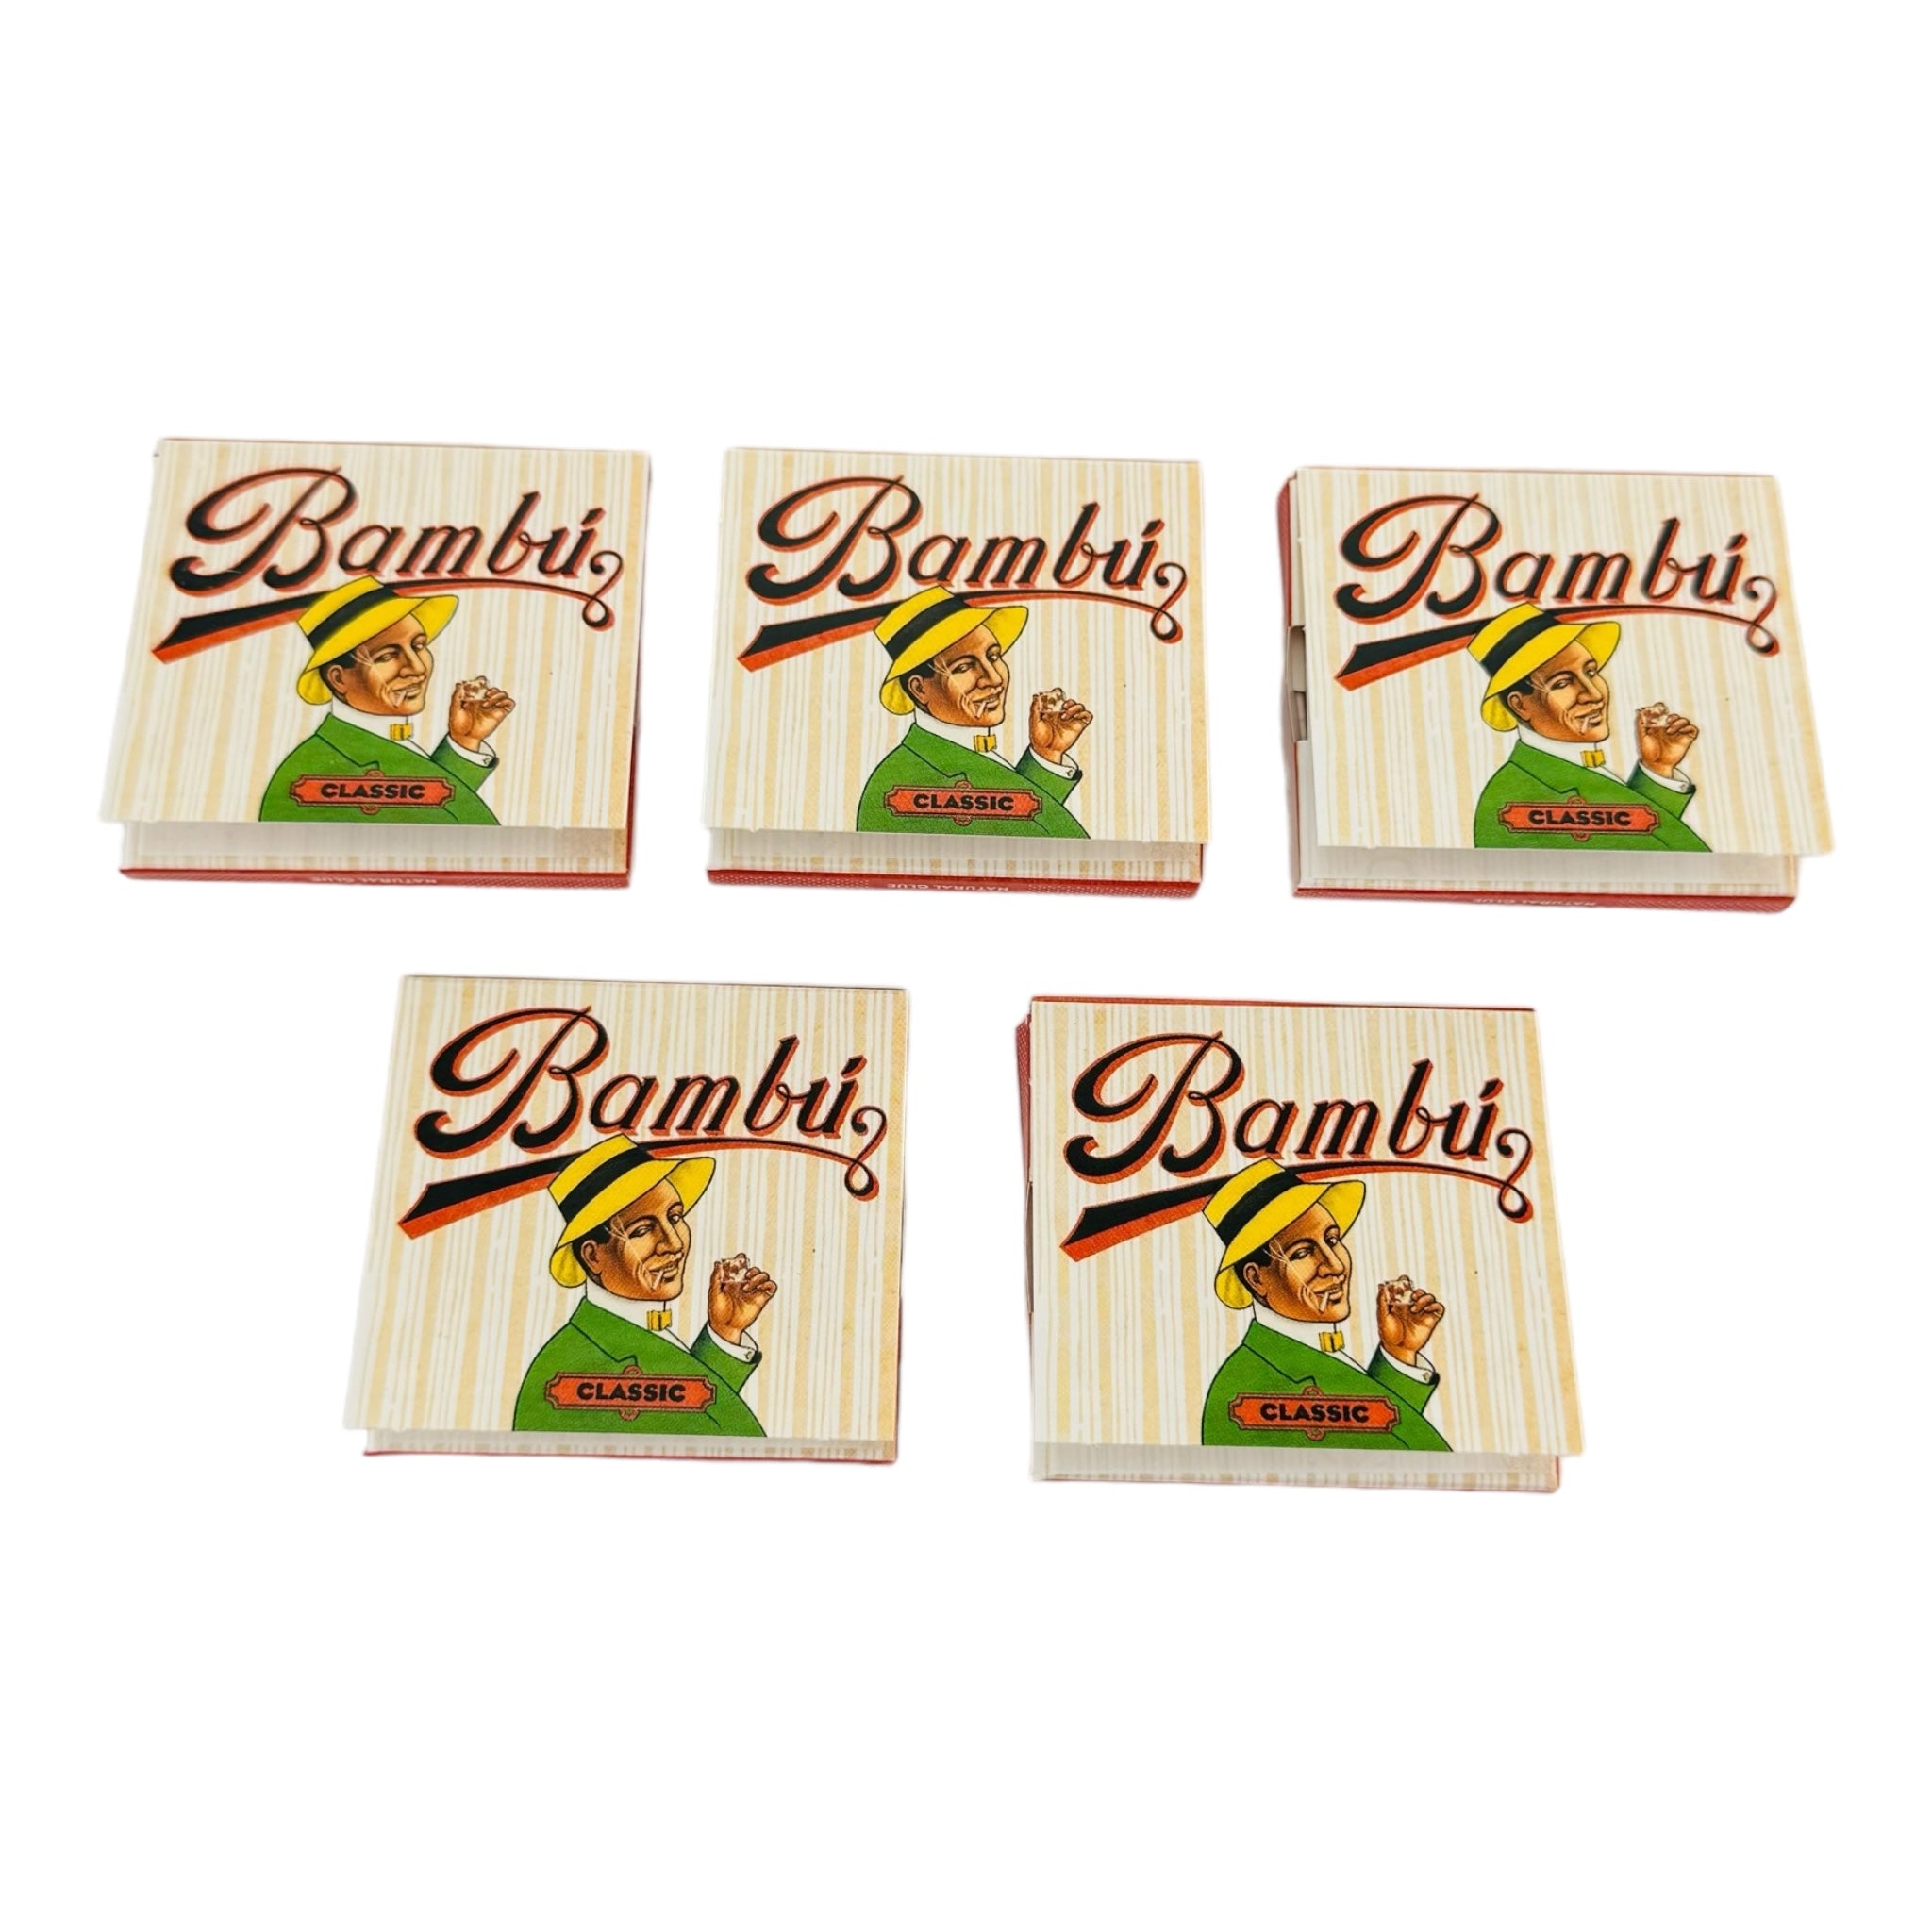 Bambu Rolling Papers Classic Size - 5 Packs